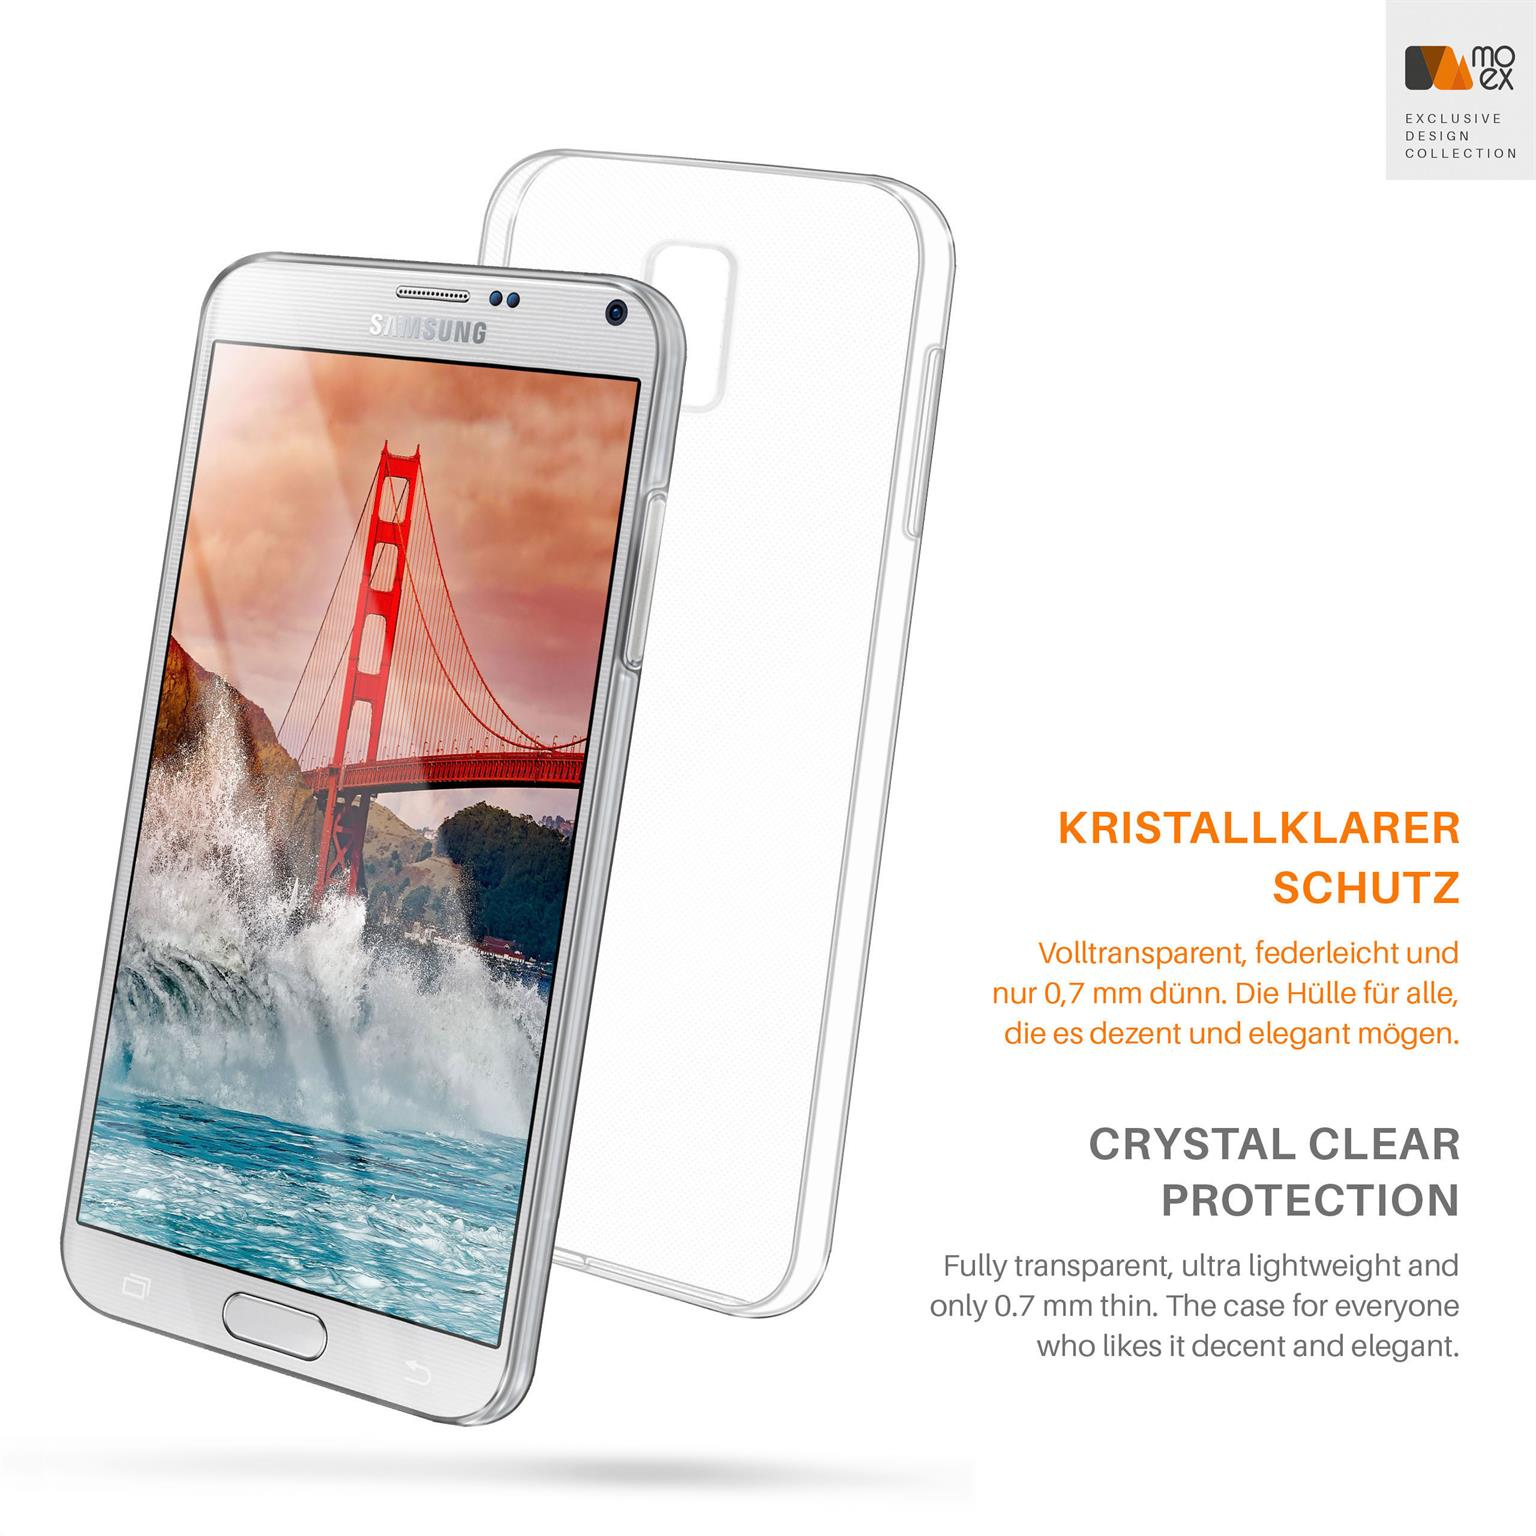 MOEX Aero Case, Crystal-Clear 4, Note Backcover, Samsung, Galaxy